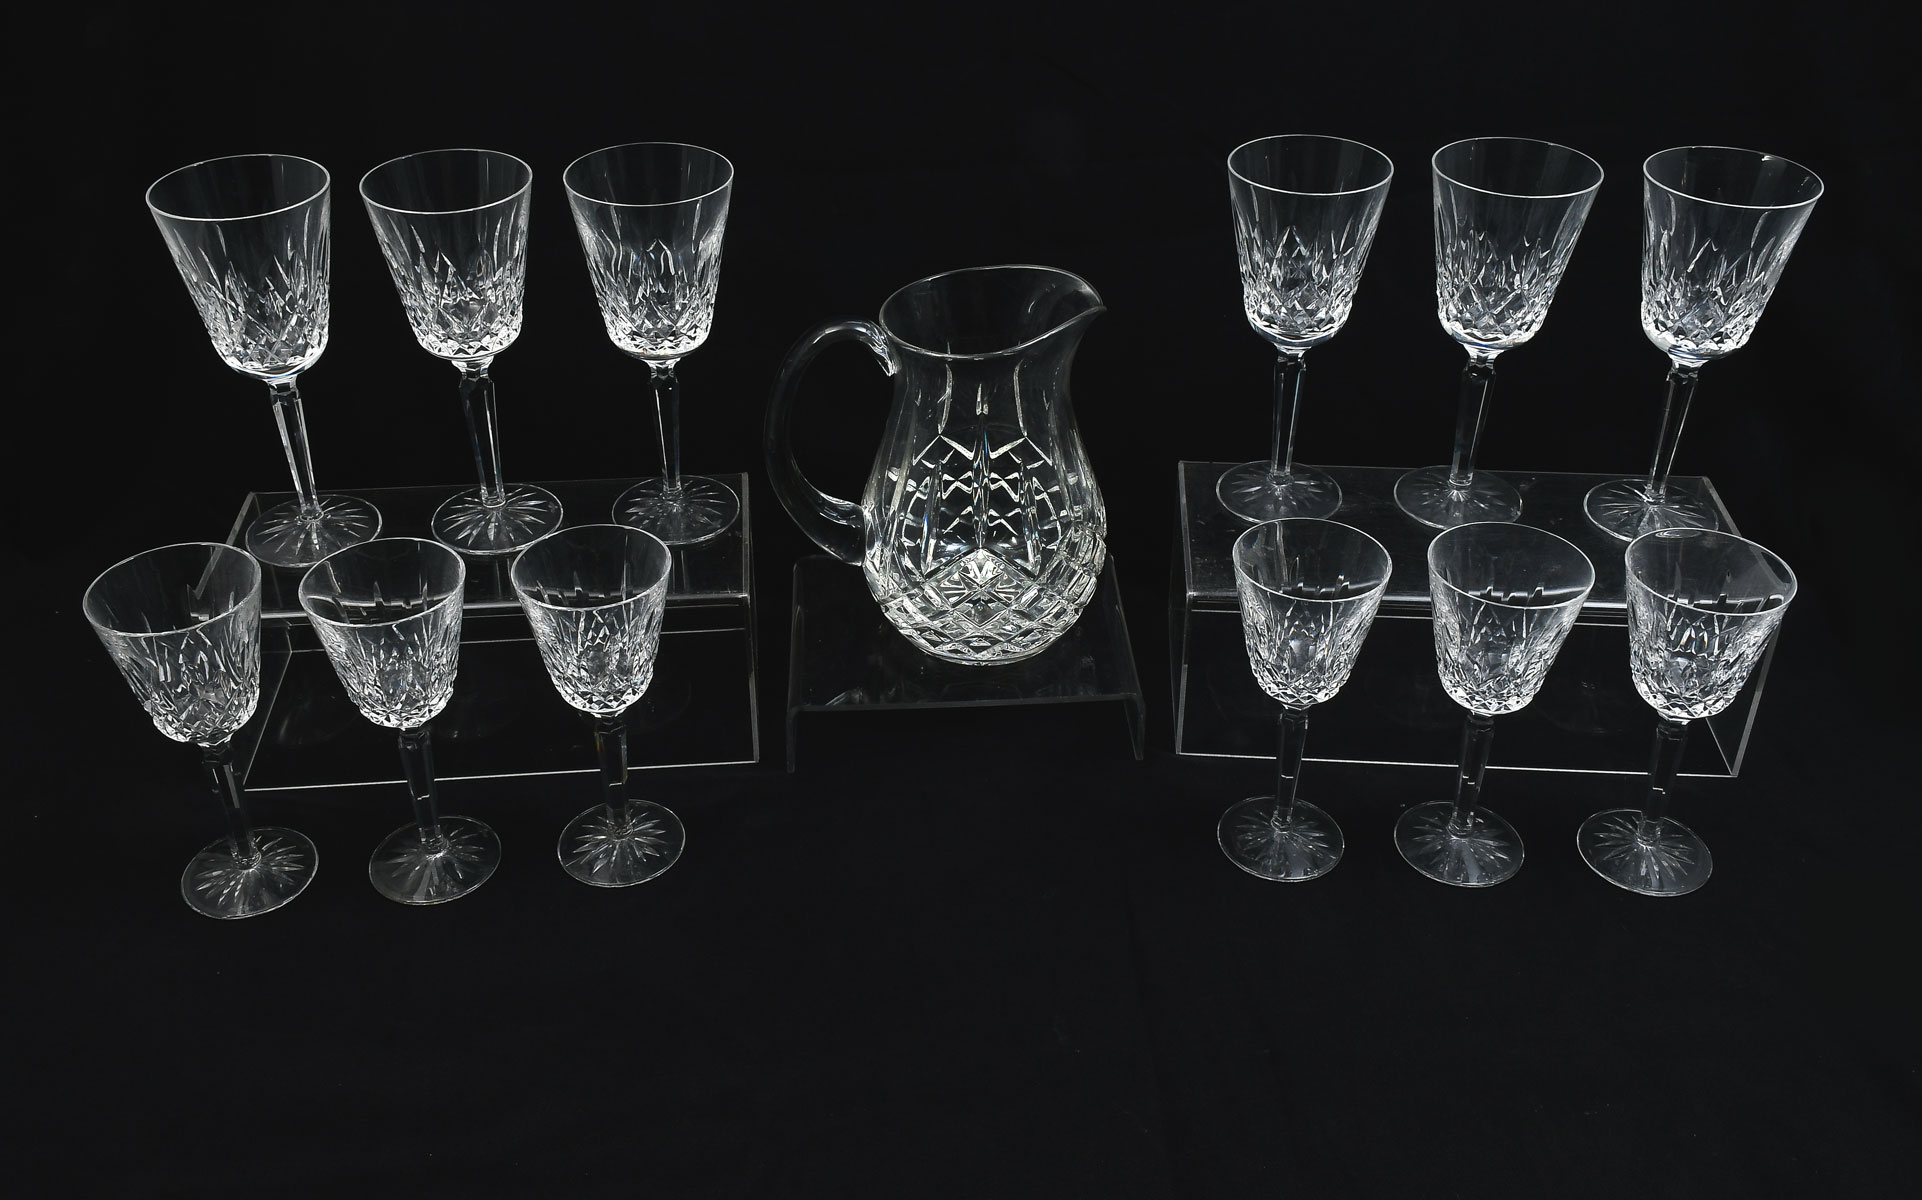 13 PIECE WATERFORD LISMORE GLASSES